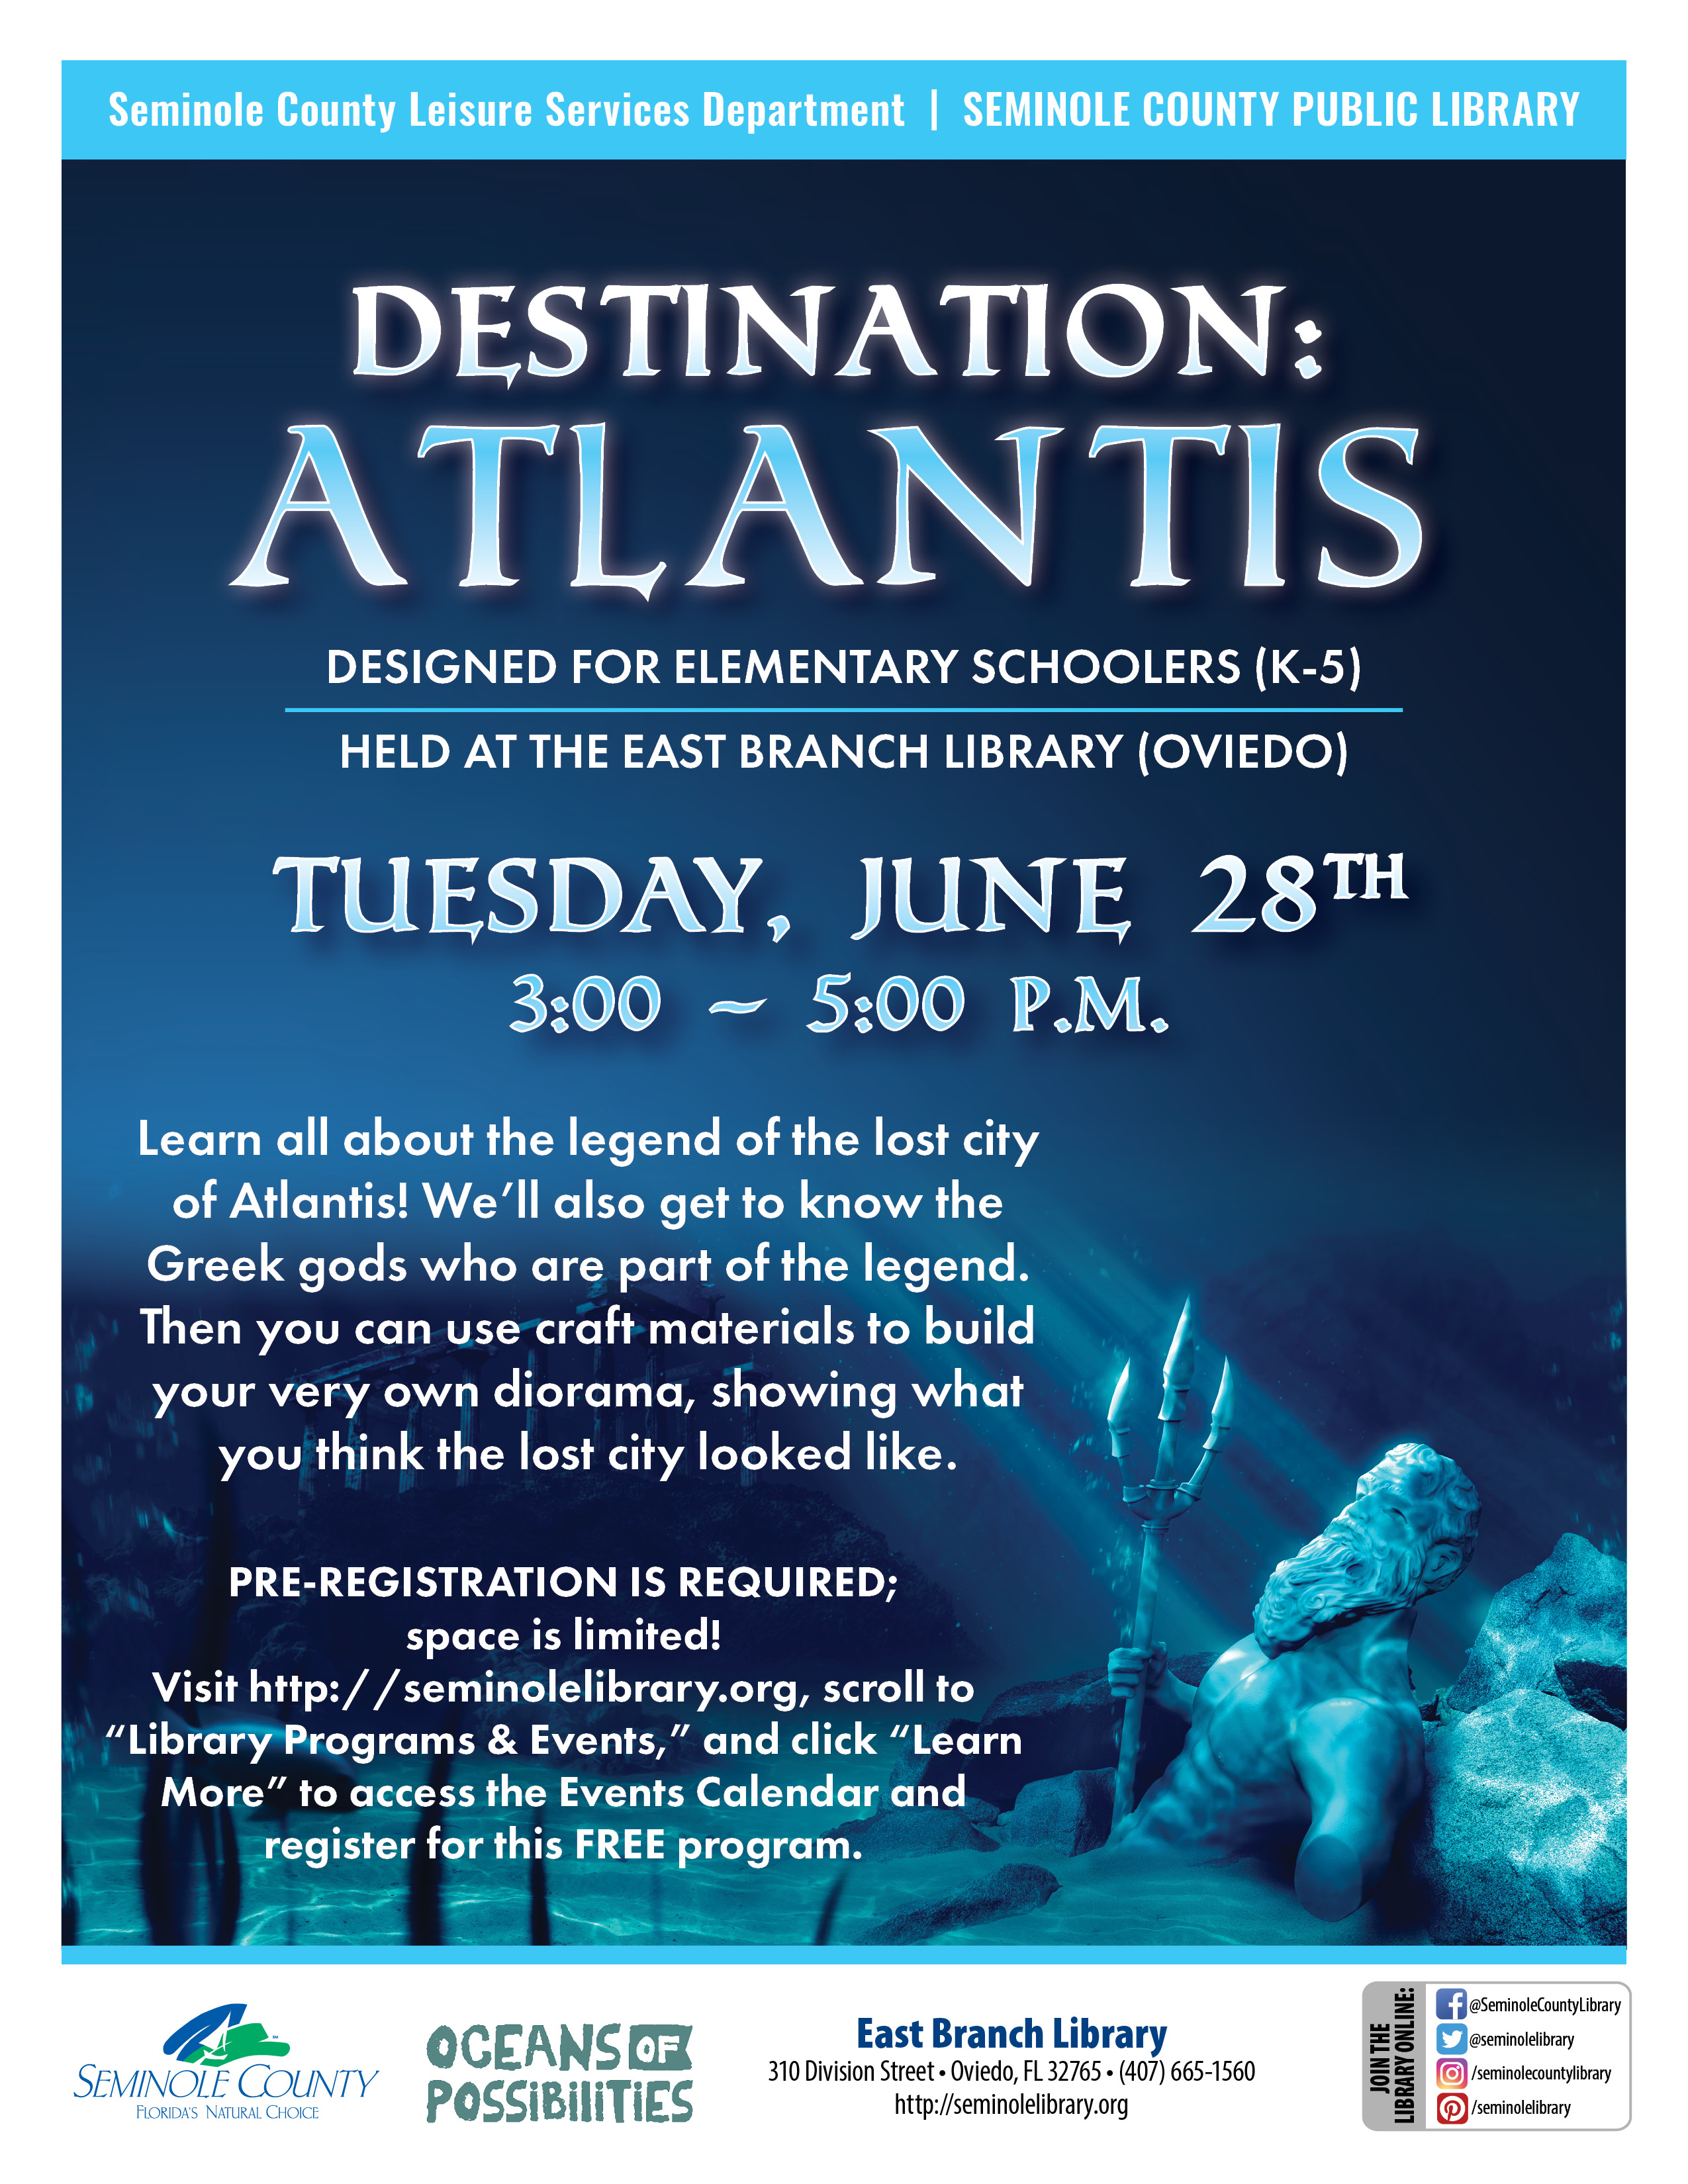 Destination Atlantis for School Age Kids at the East Branch Library